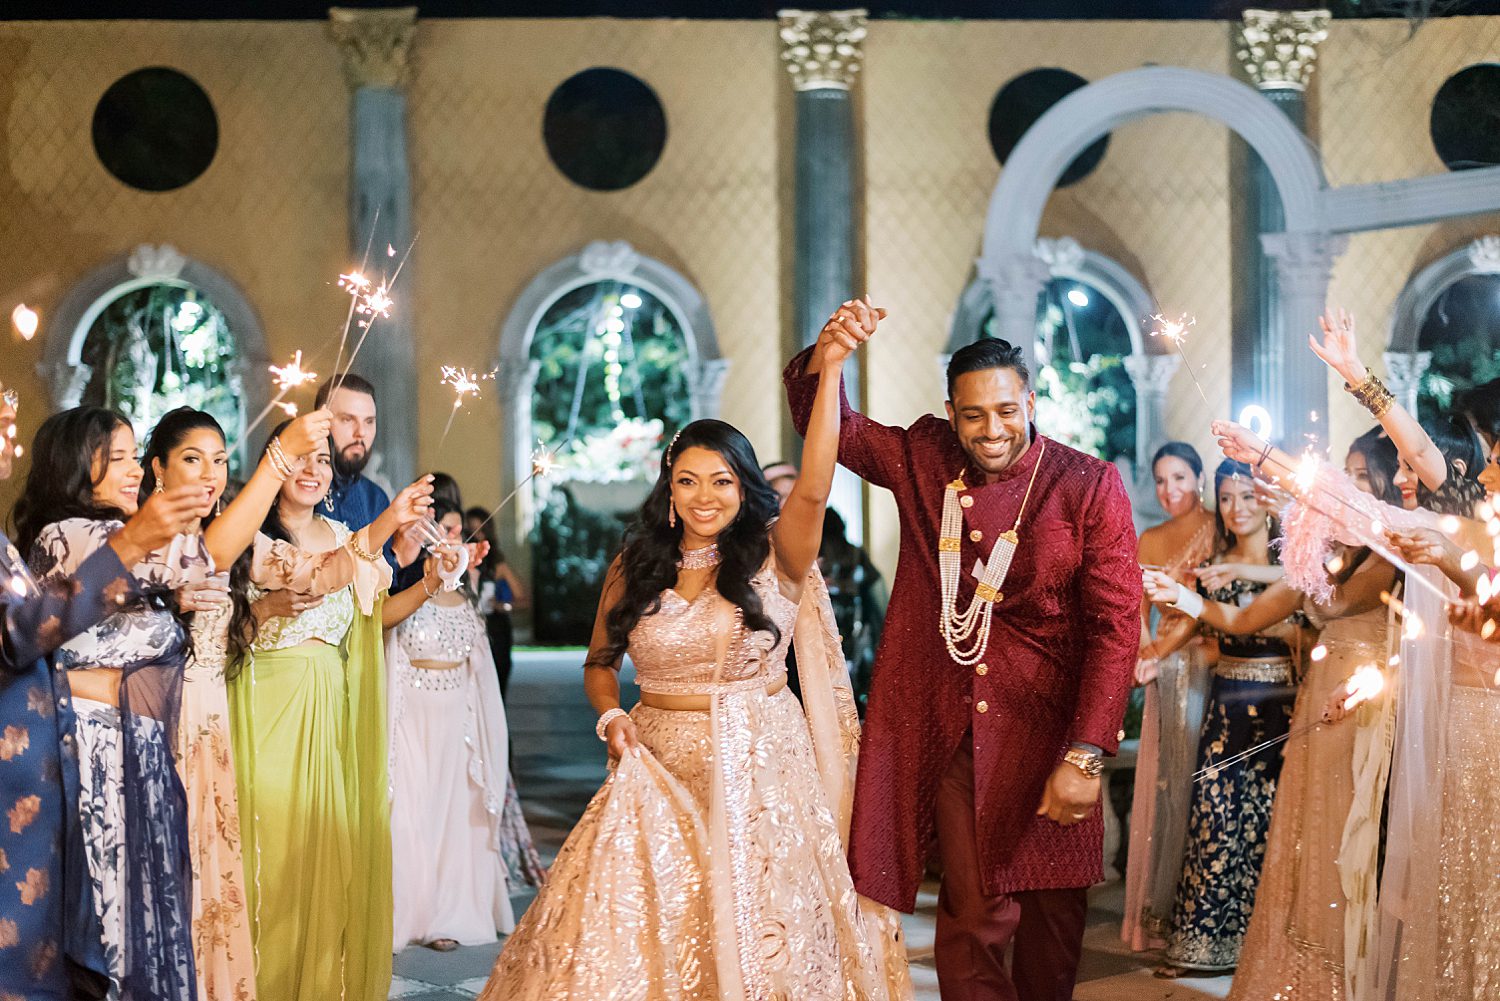 newlyweds leave wedding through sparkler exit in traditional Indian attire